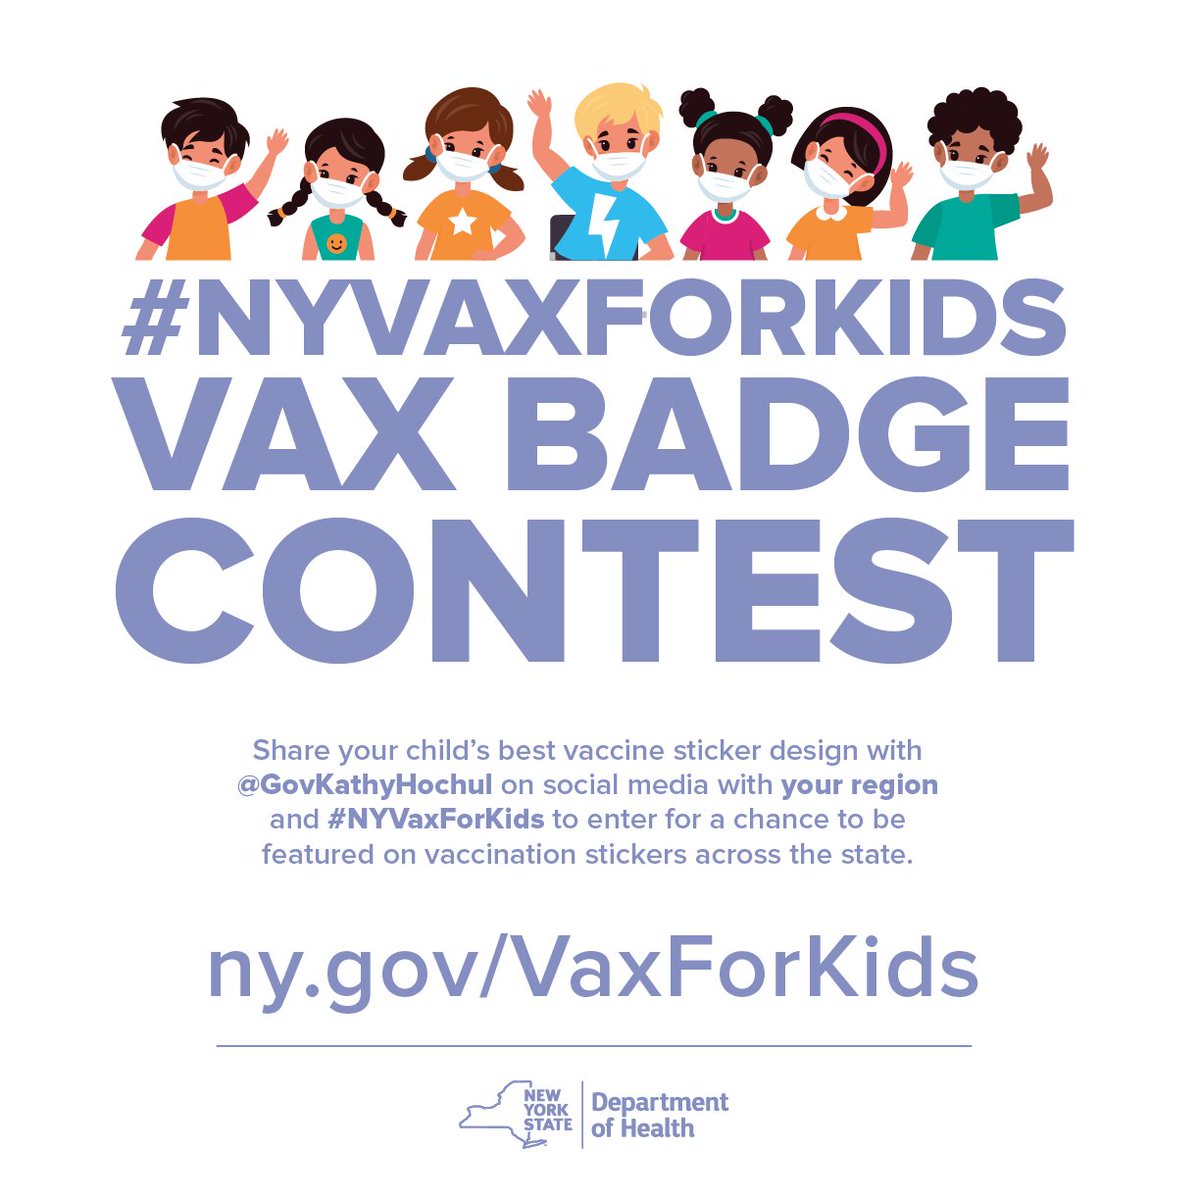 NEWS: Today we’re launching a contest for kids to design their own version of the “I’m vaccinated” sticker to be featured at vaccine sites across the state.